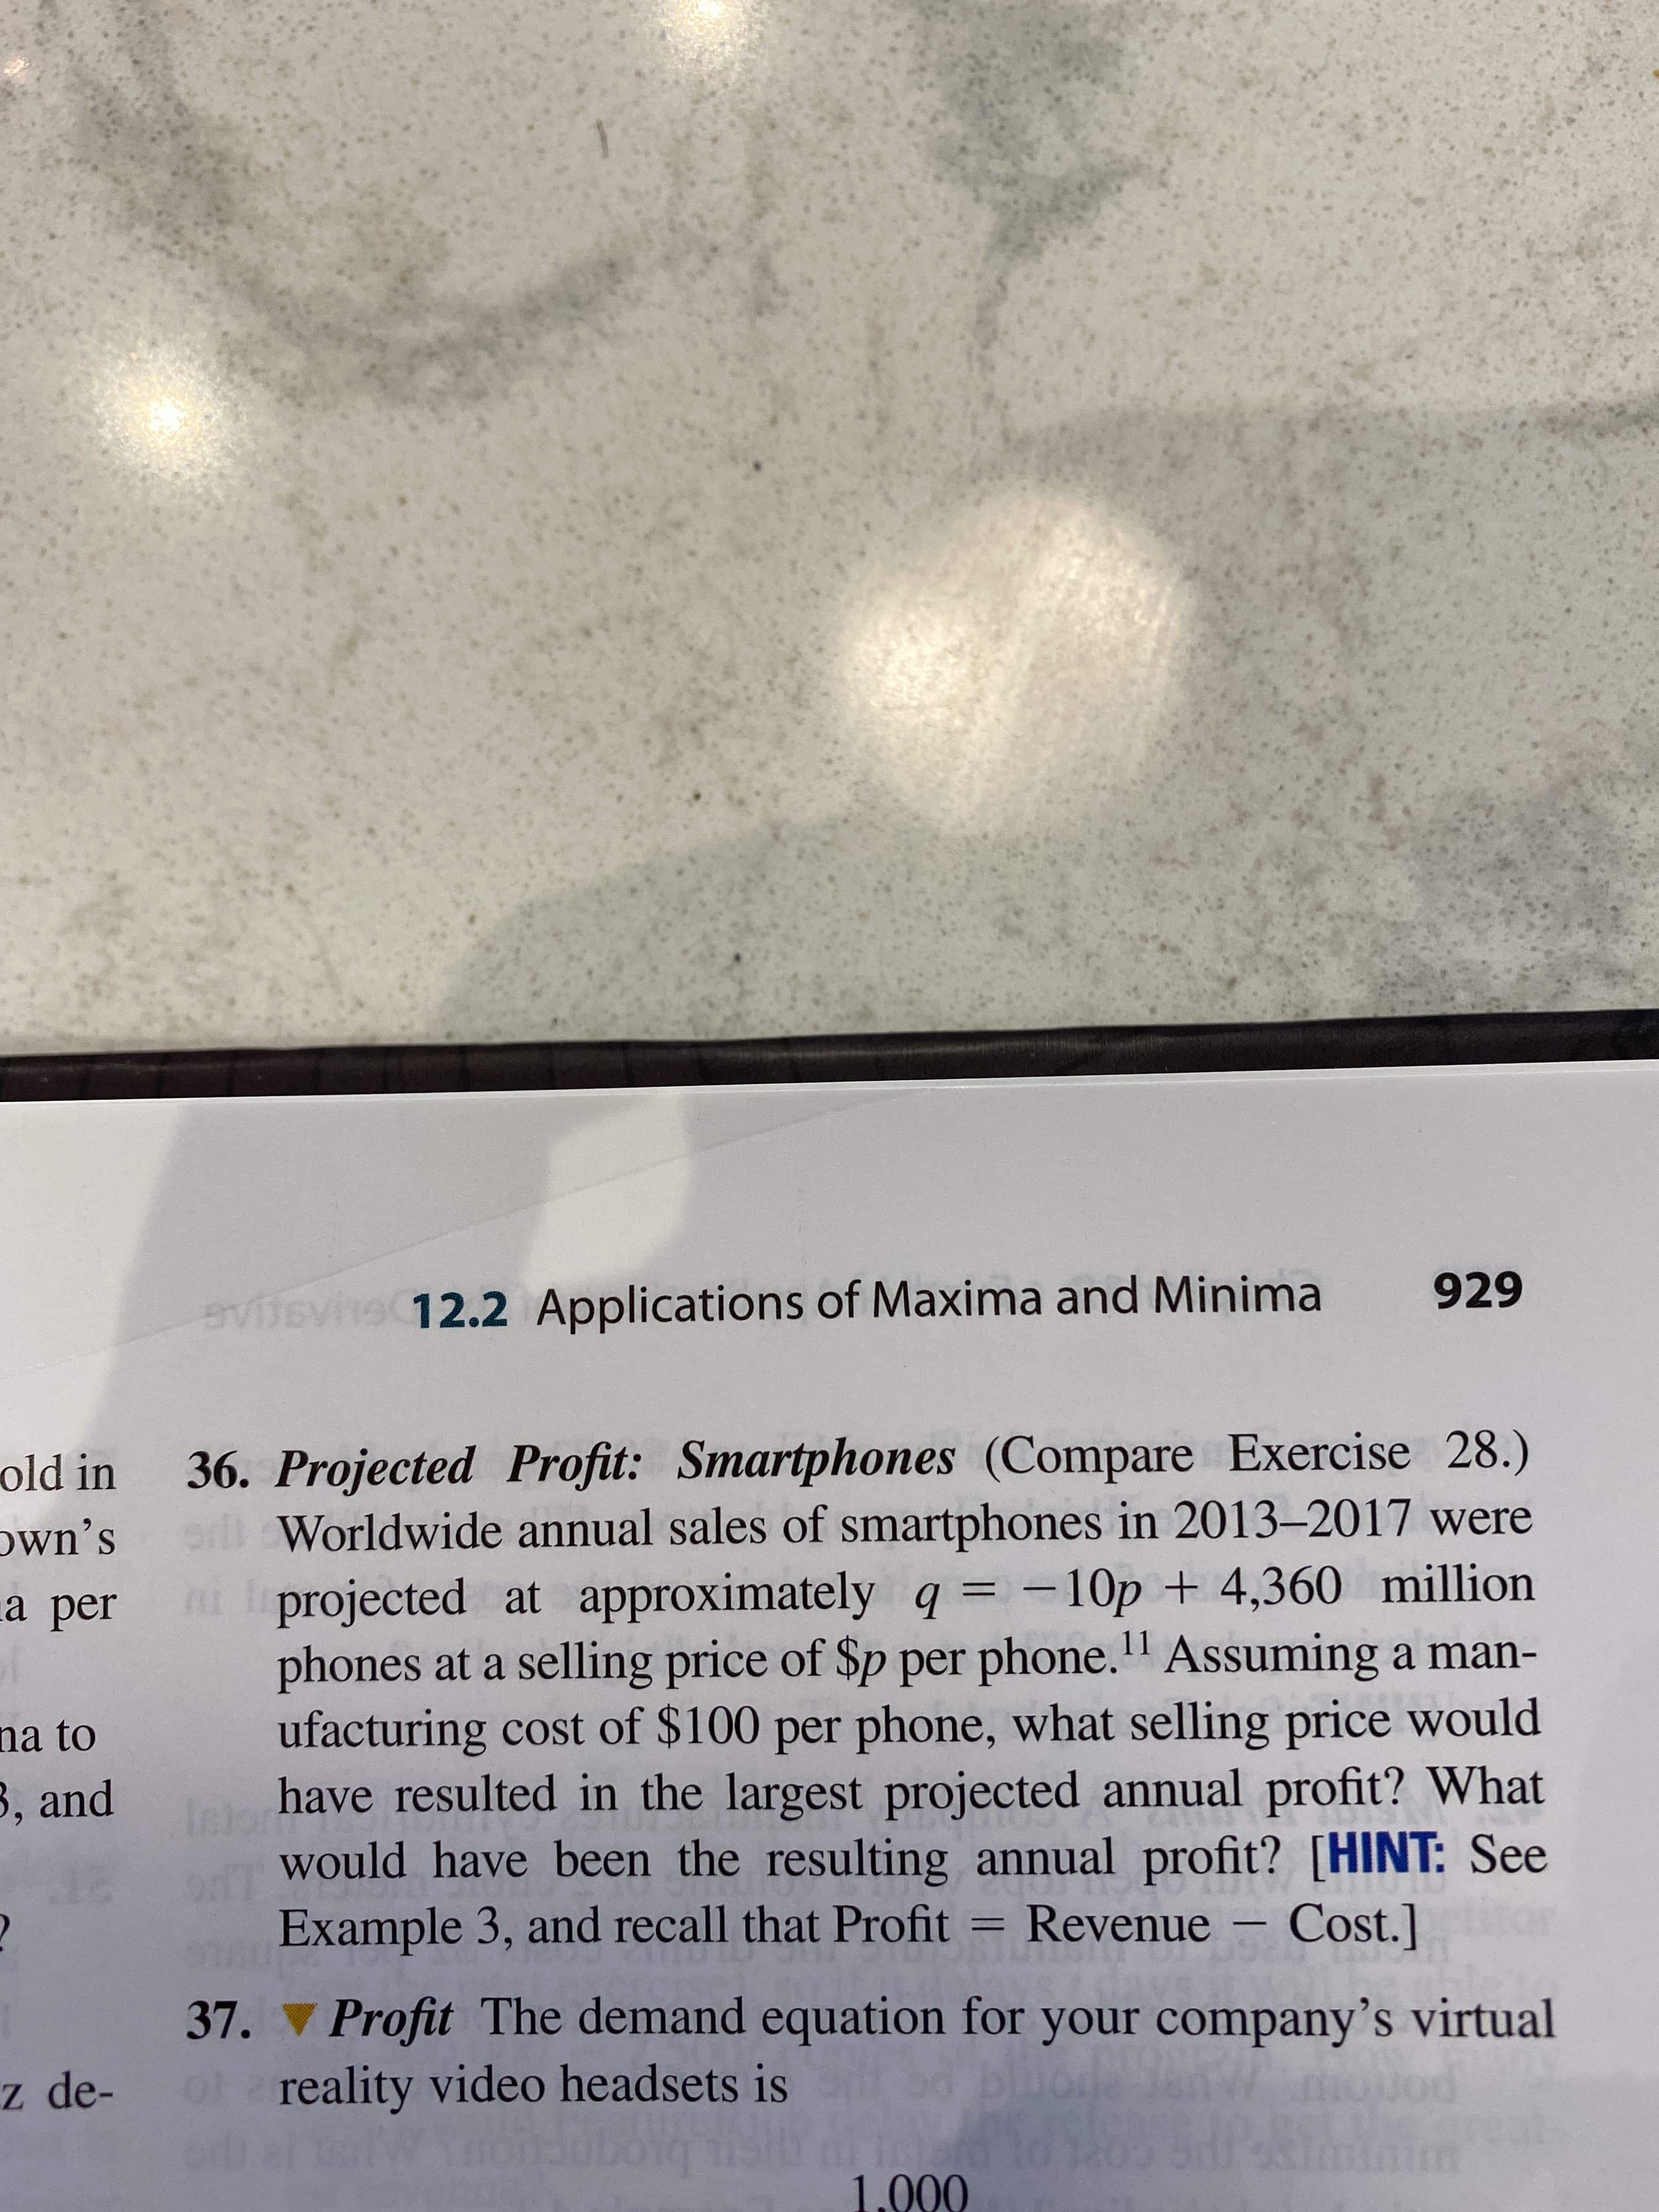 929
evsvne 12.2 Applications of Maxima and Minima
36. Projected Profit: Smartphones (Compare Exercise 28.)
o Worldwide annual sales of smartphones in 2013–2017 were
old in
own's
ni projected at approximately q = -10p + 4,360 million
phones at a selling price of $p per phone." Assuming a man-
ufacturing cost of $100 per phone, what selling price would
have resulted in the largest projected annual profit? What
would have been the resulting annual profit? [HINT: See
Example 3, and recall that Profit =
a per
11
na to
3, and
Revenue – Cost.]
37. Profit The demand equation for your company's virtual
z de-
of reality video headsets is
molod
1.000
